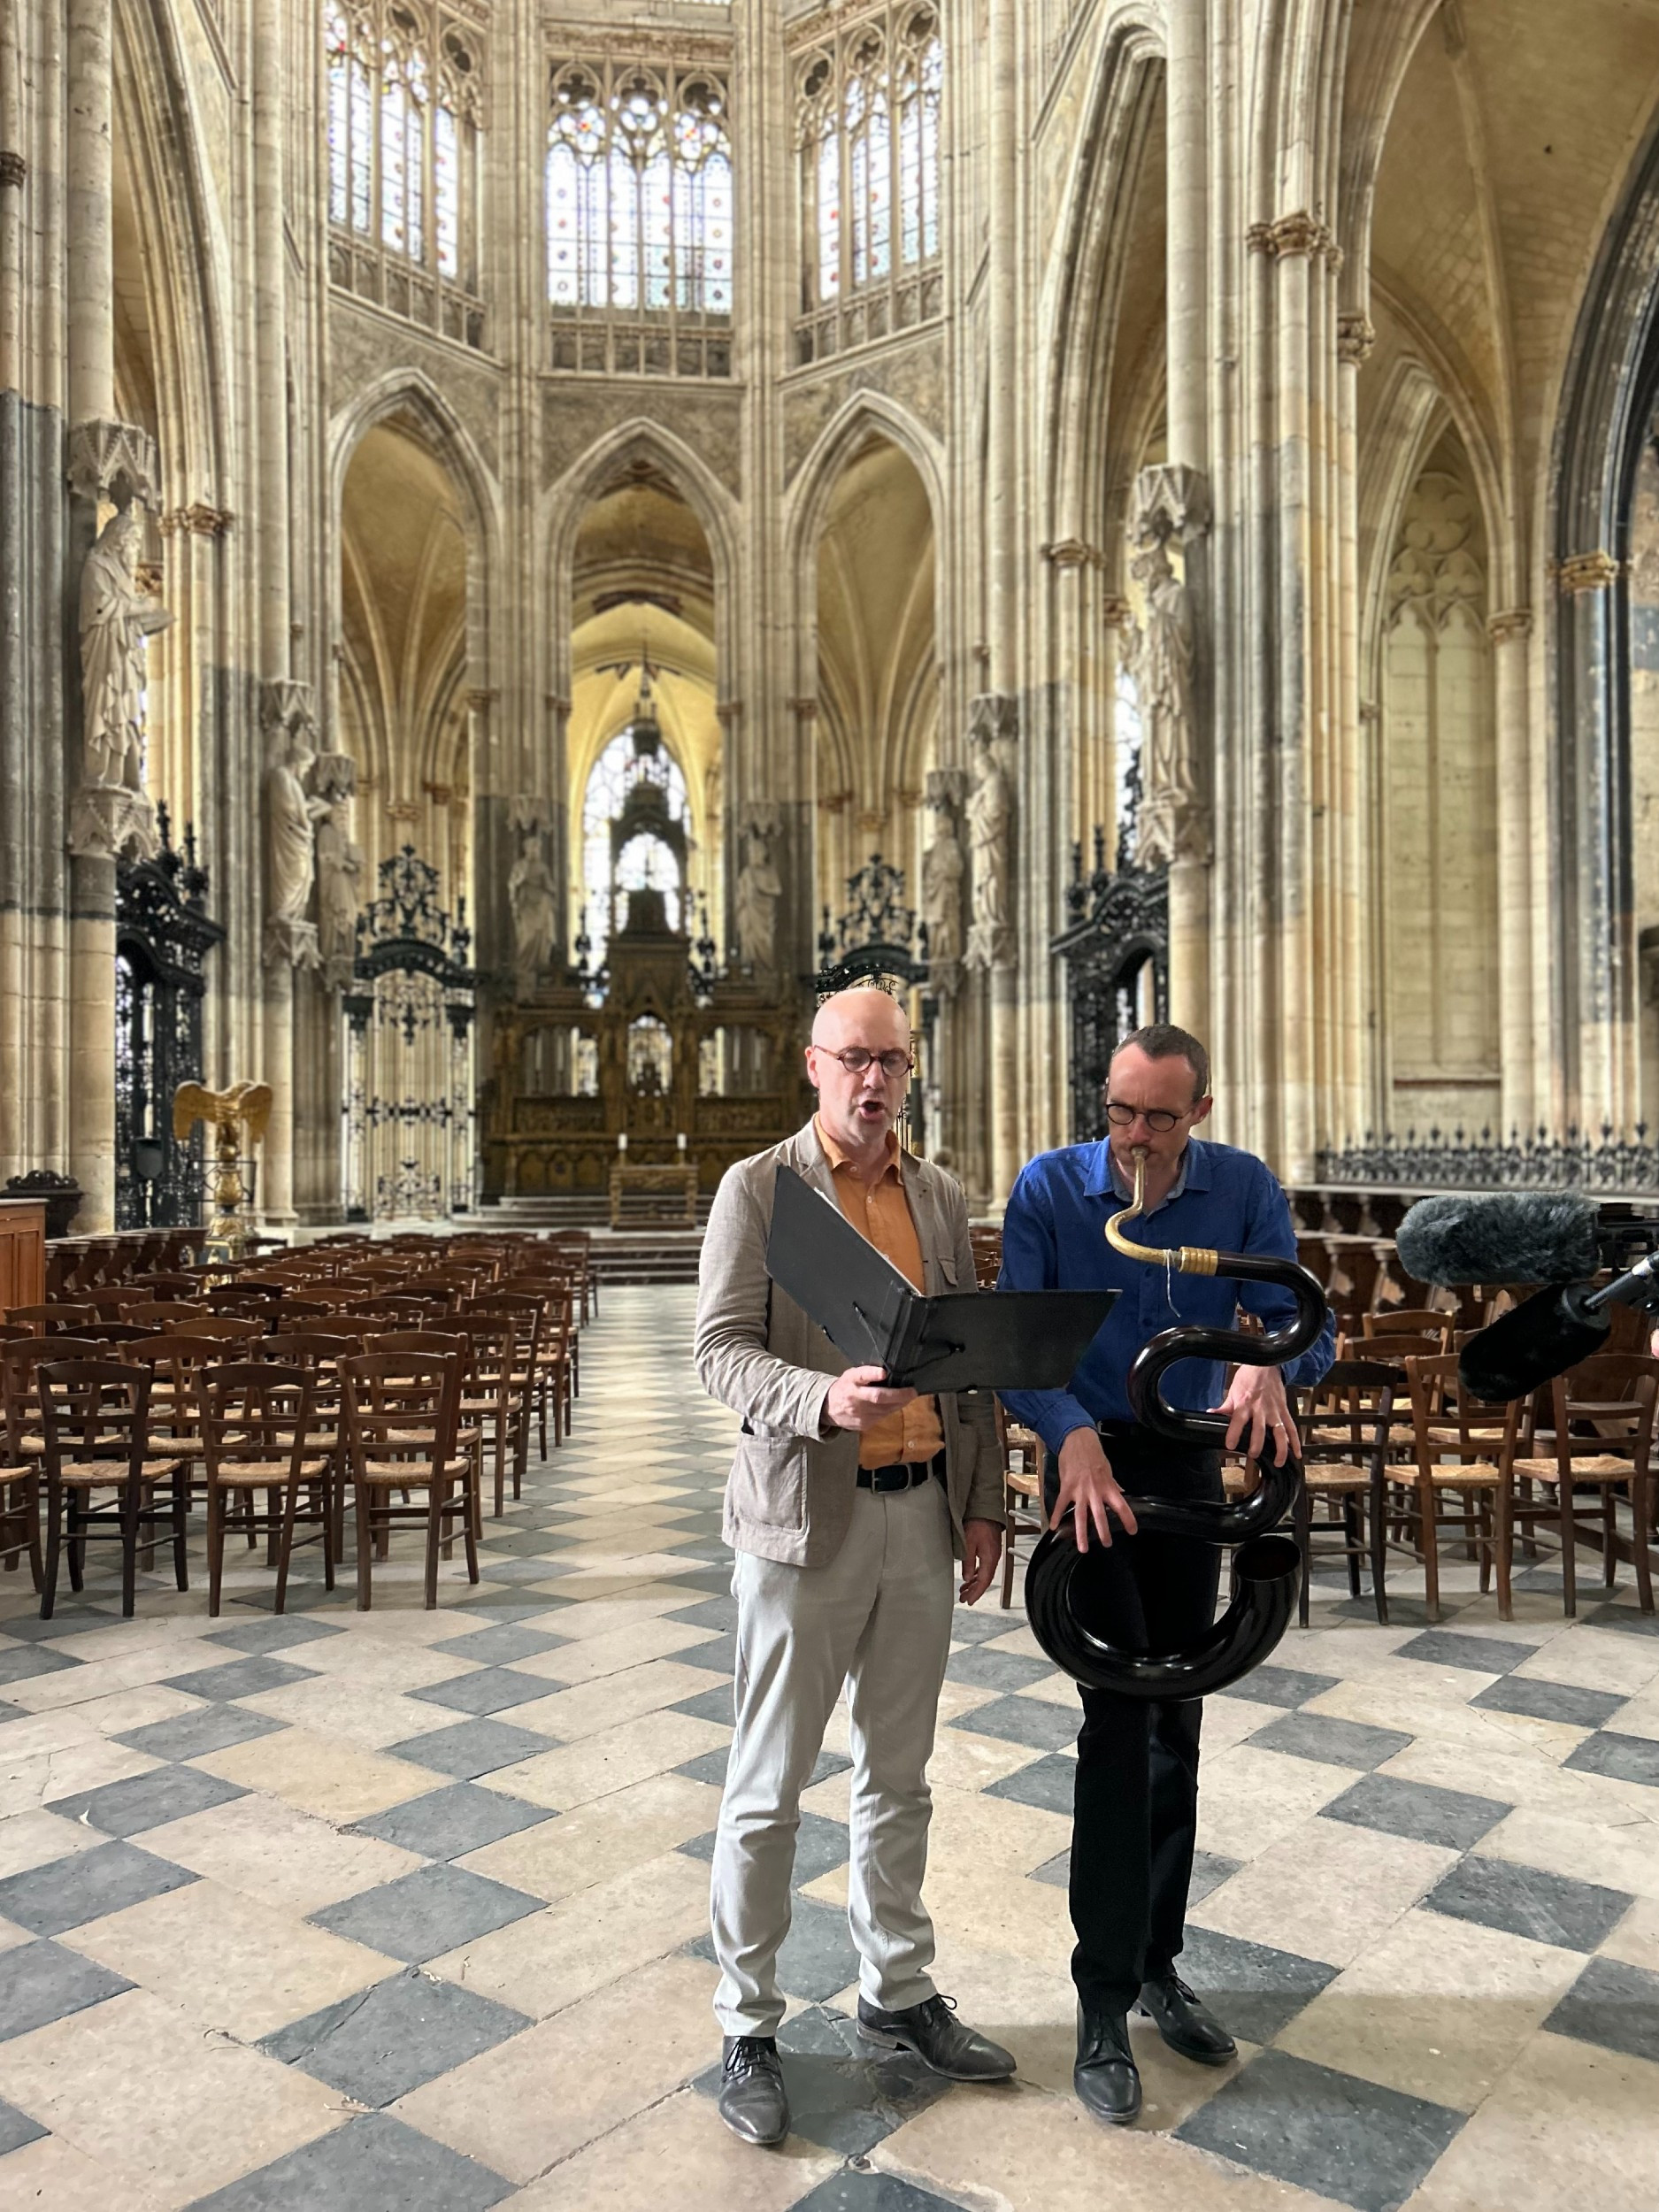 singer and sepent player in a cathedral